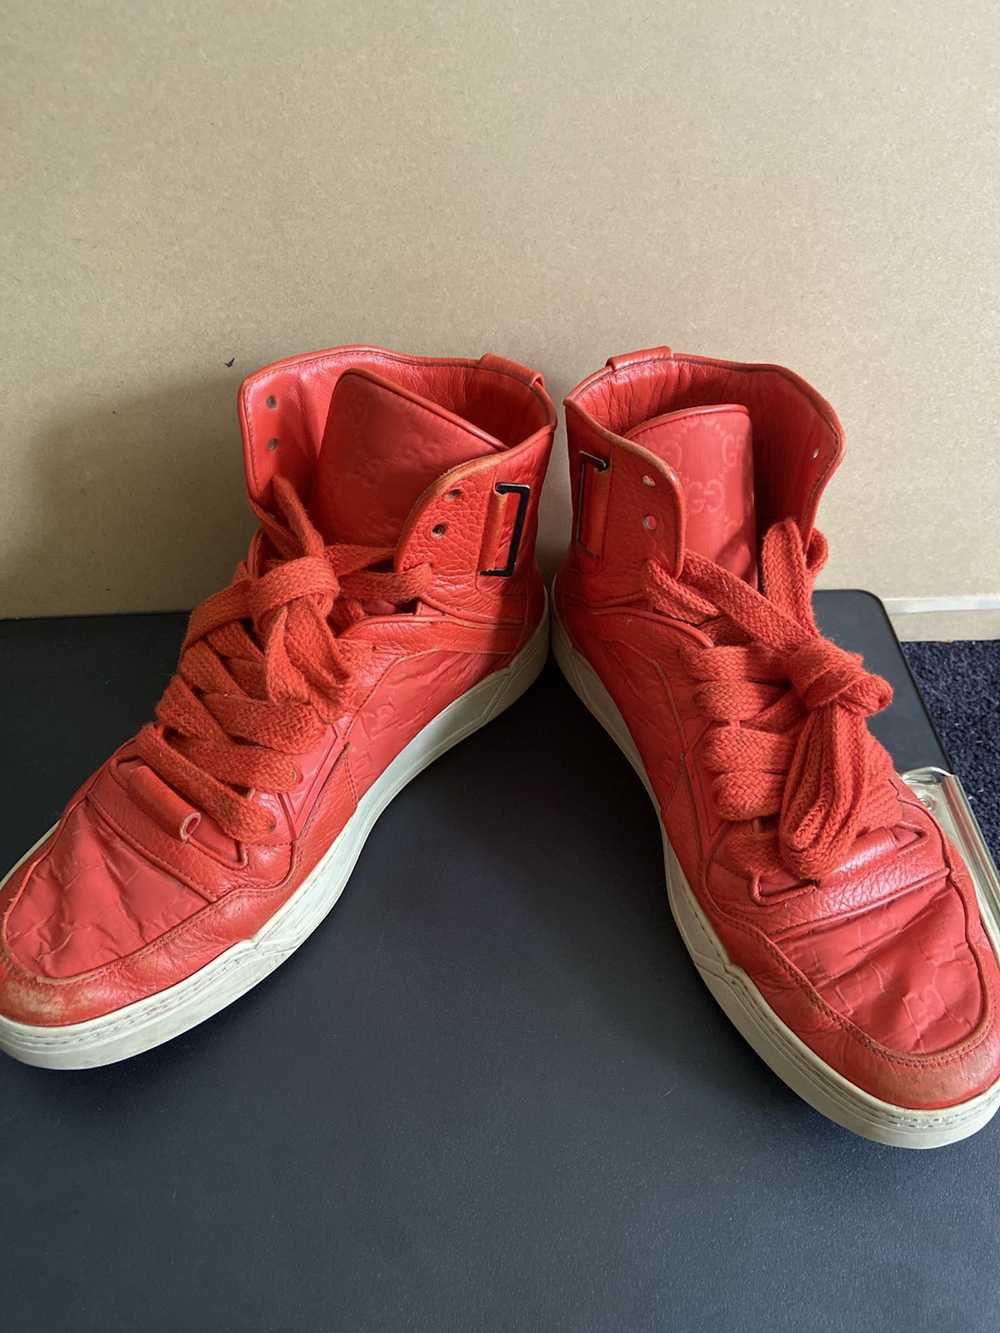 Gucci Guccimissa High Top Orange-Red Sneakers - image 2